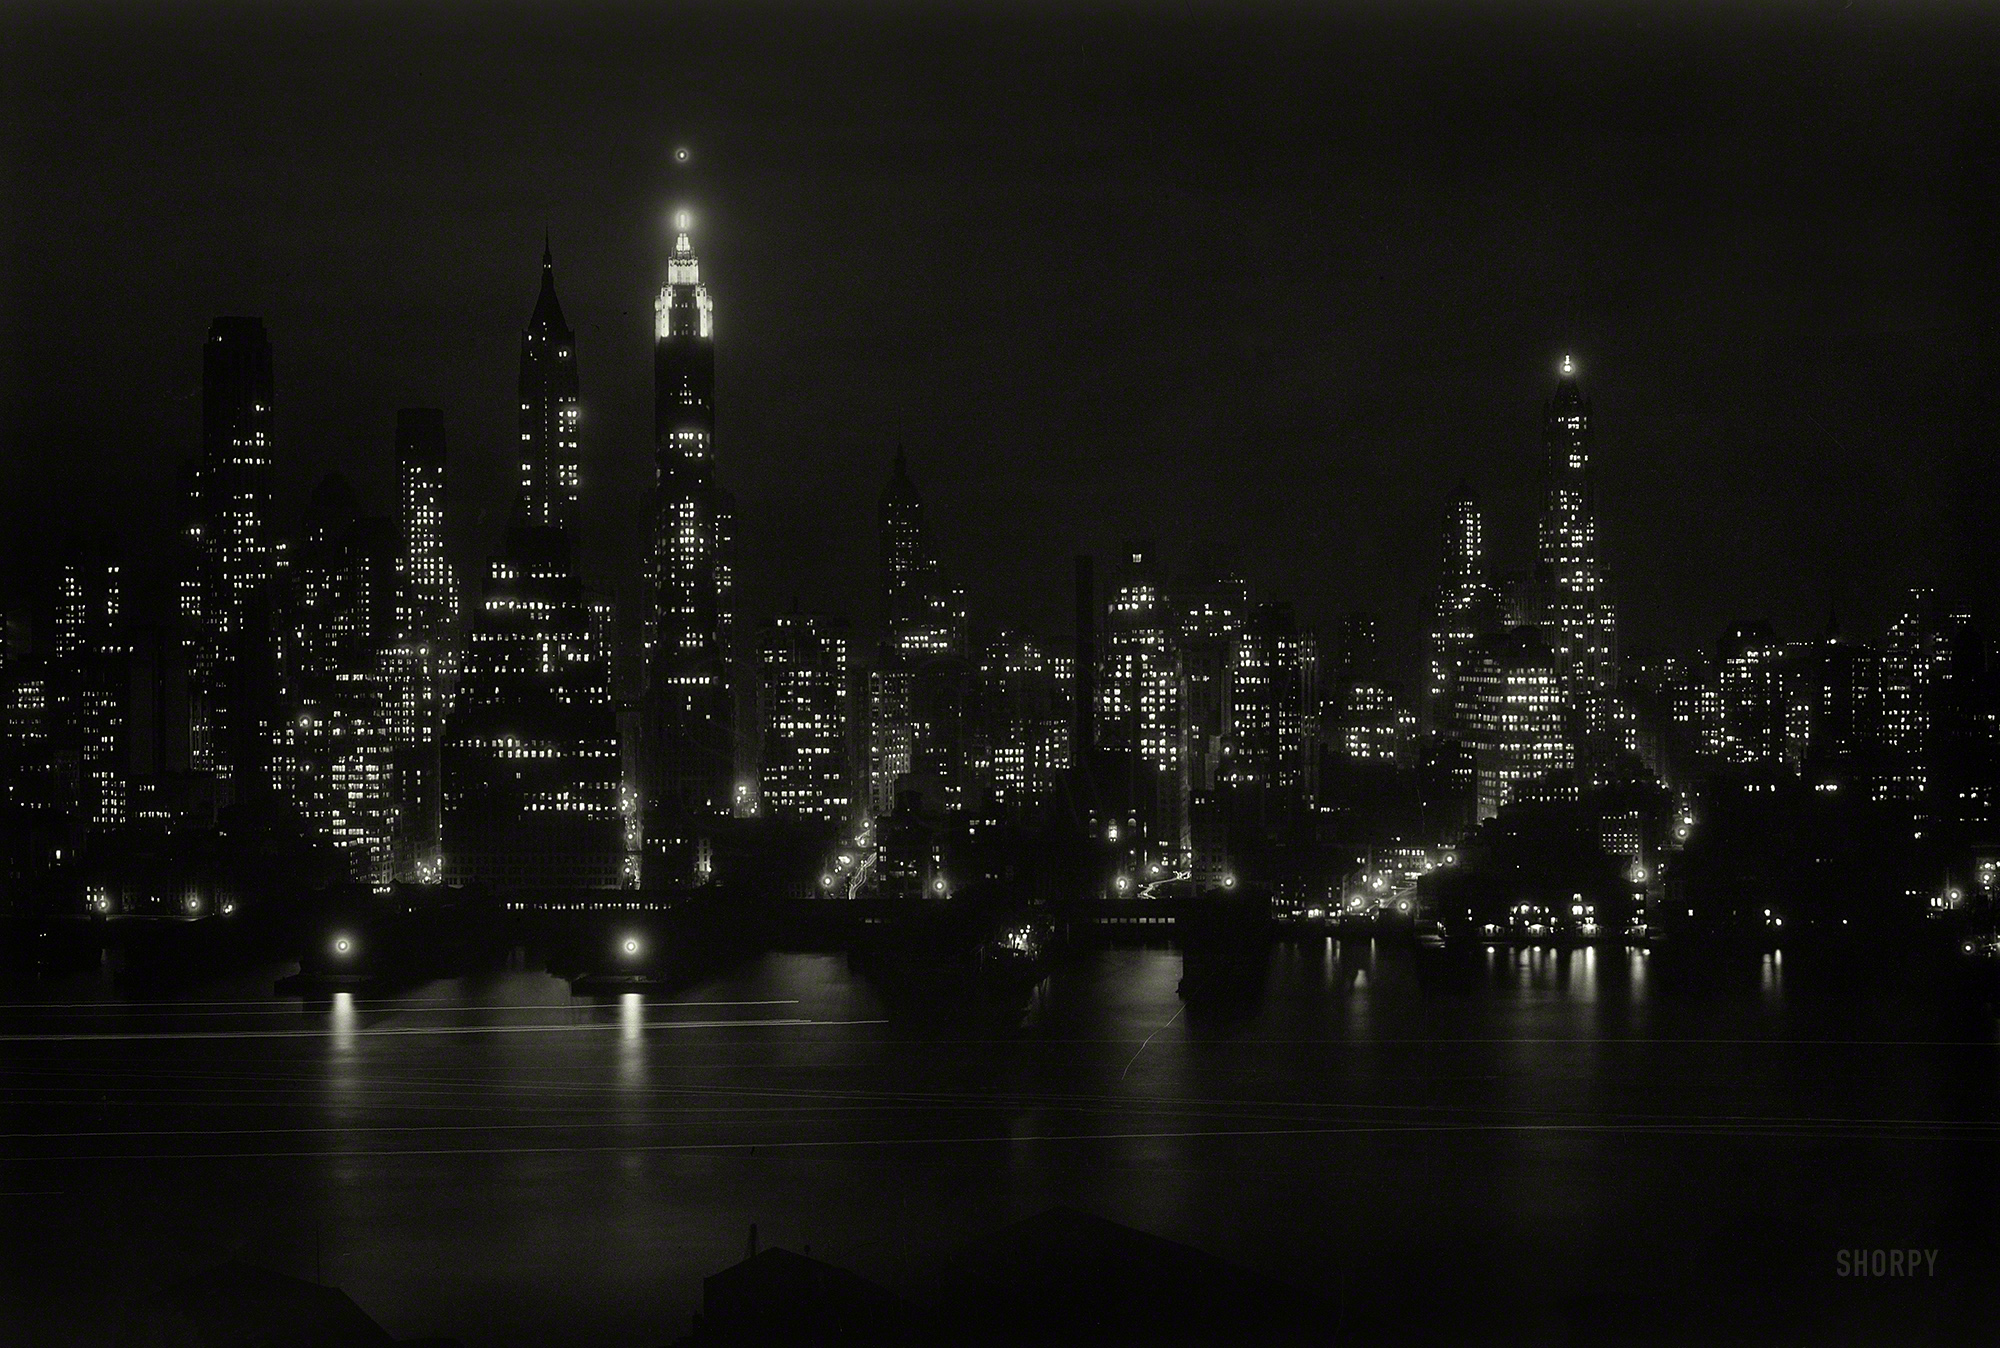 January 6, 1933. "Manhattan from St. George Hotel in Brooklyn to financial district, night view." 5x7 acetate negative by Gottscho-Schleisner. View full size.